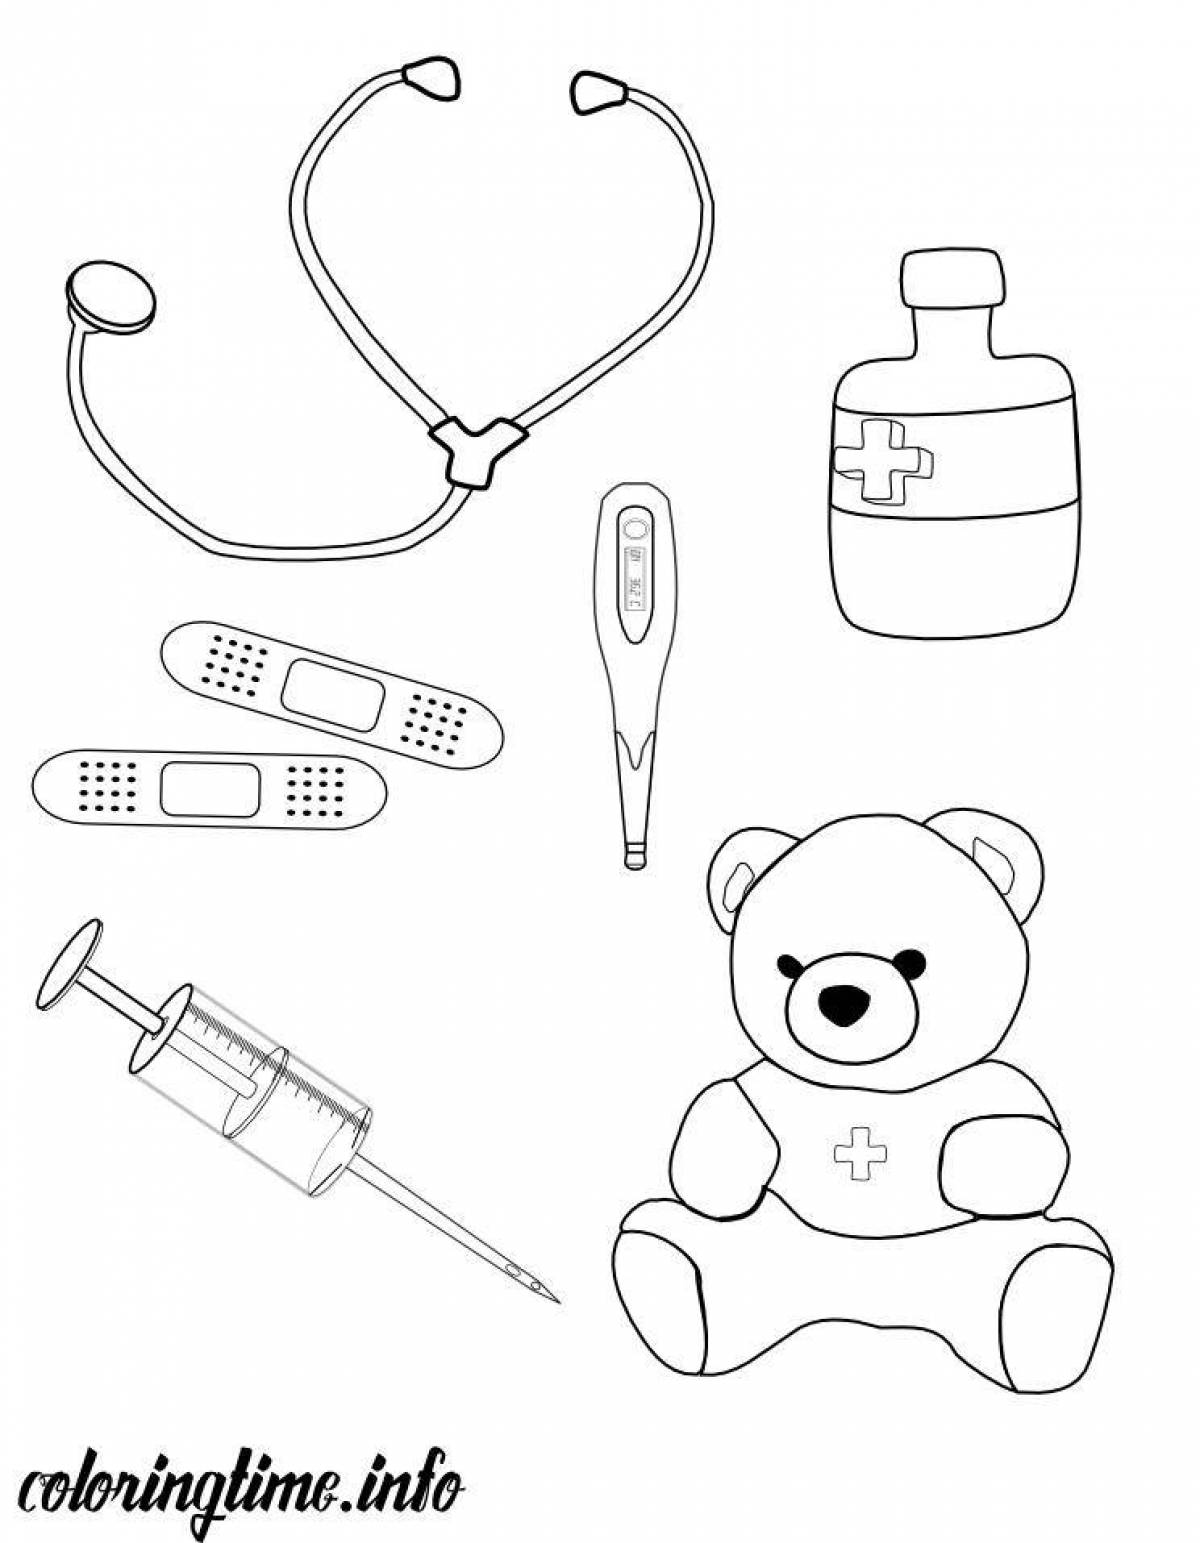 Фото Color-luminous doctor's set coloring page